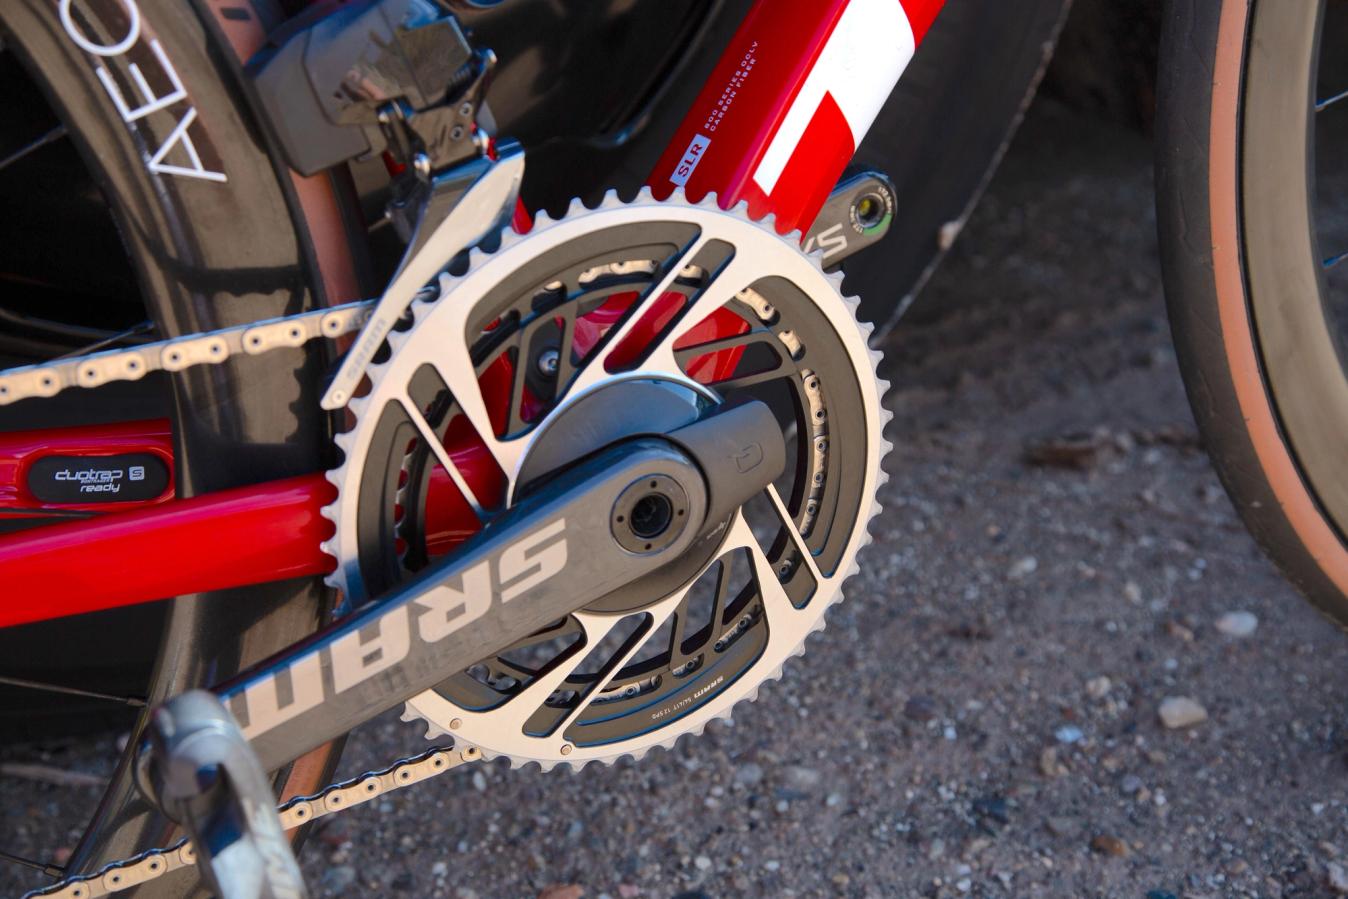 Many SRAM-sponsored teams are now using 1x set-ups for certain races, but Mollema used a 2x option for stage 3